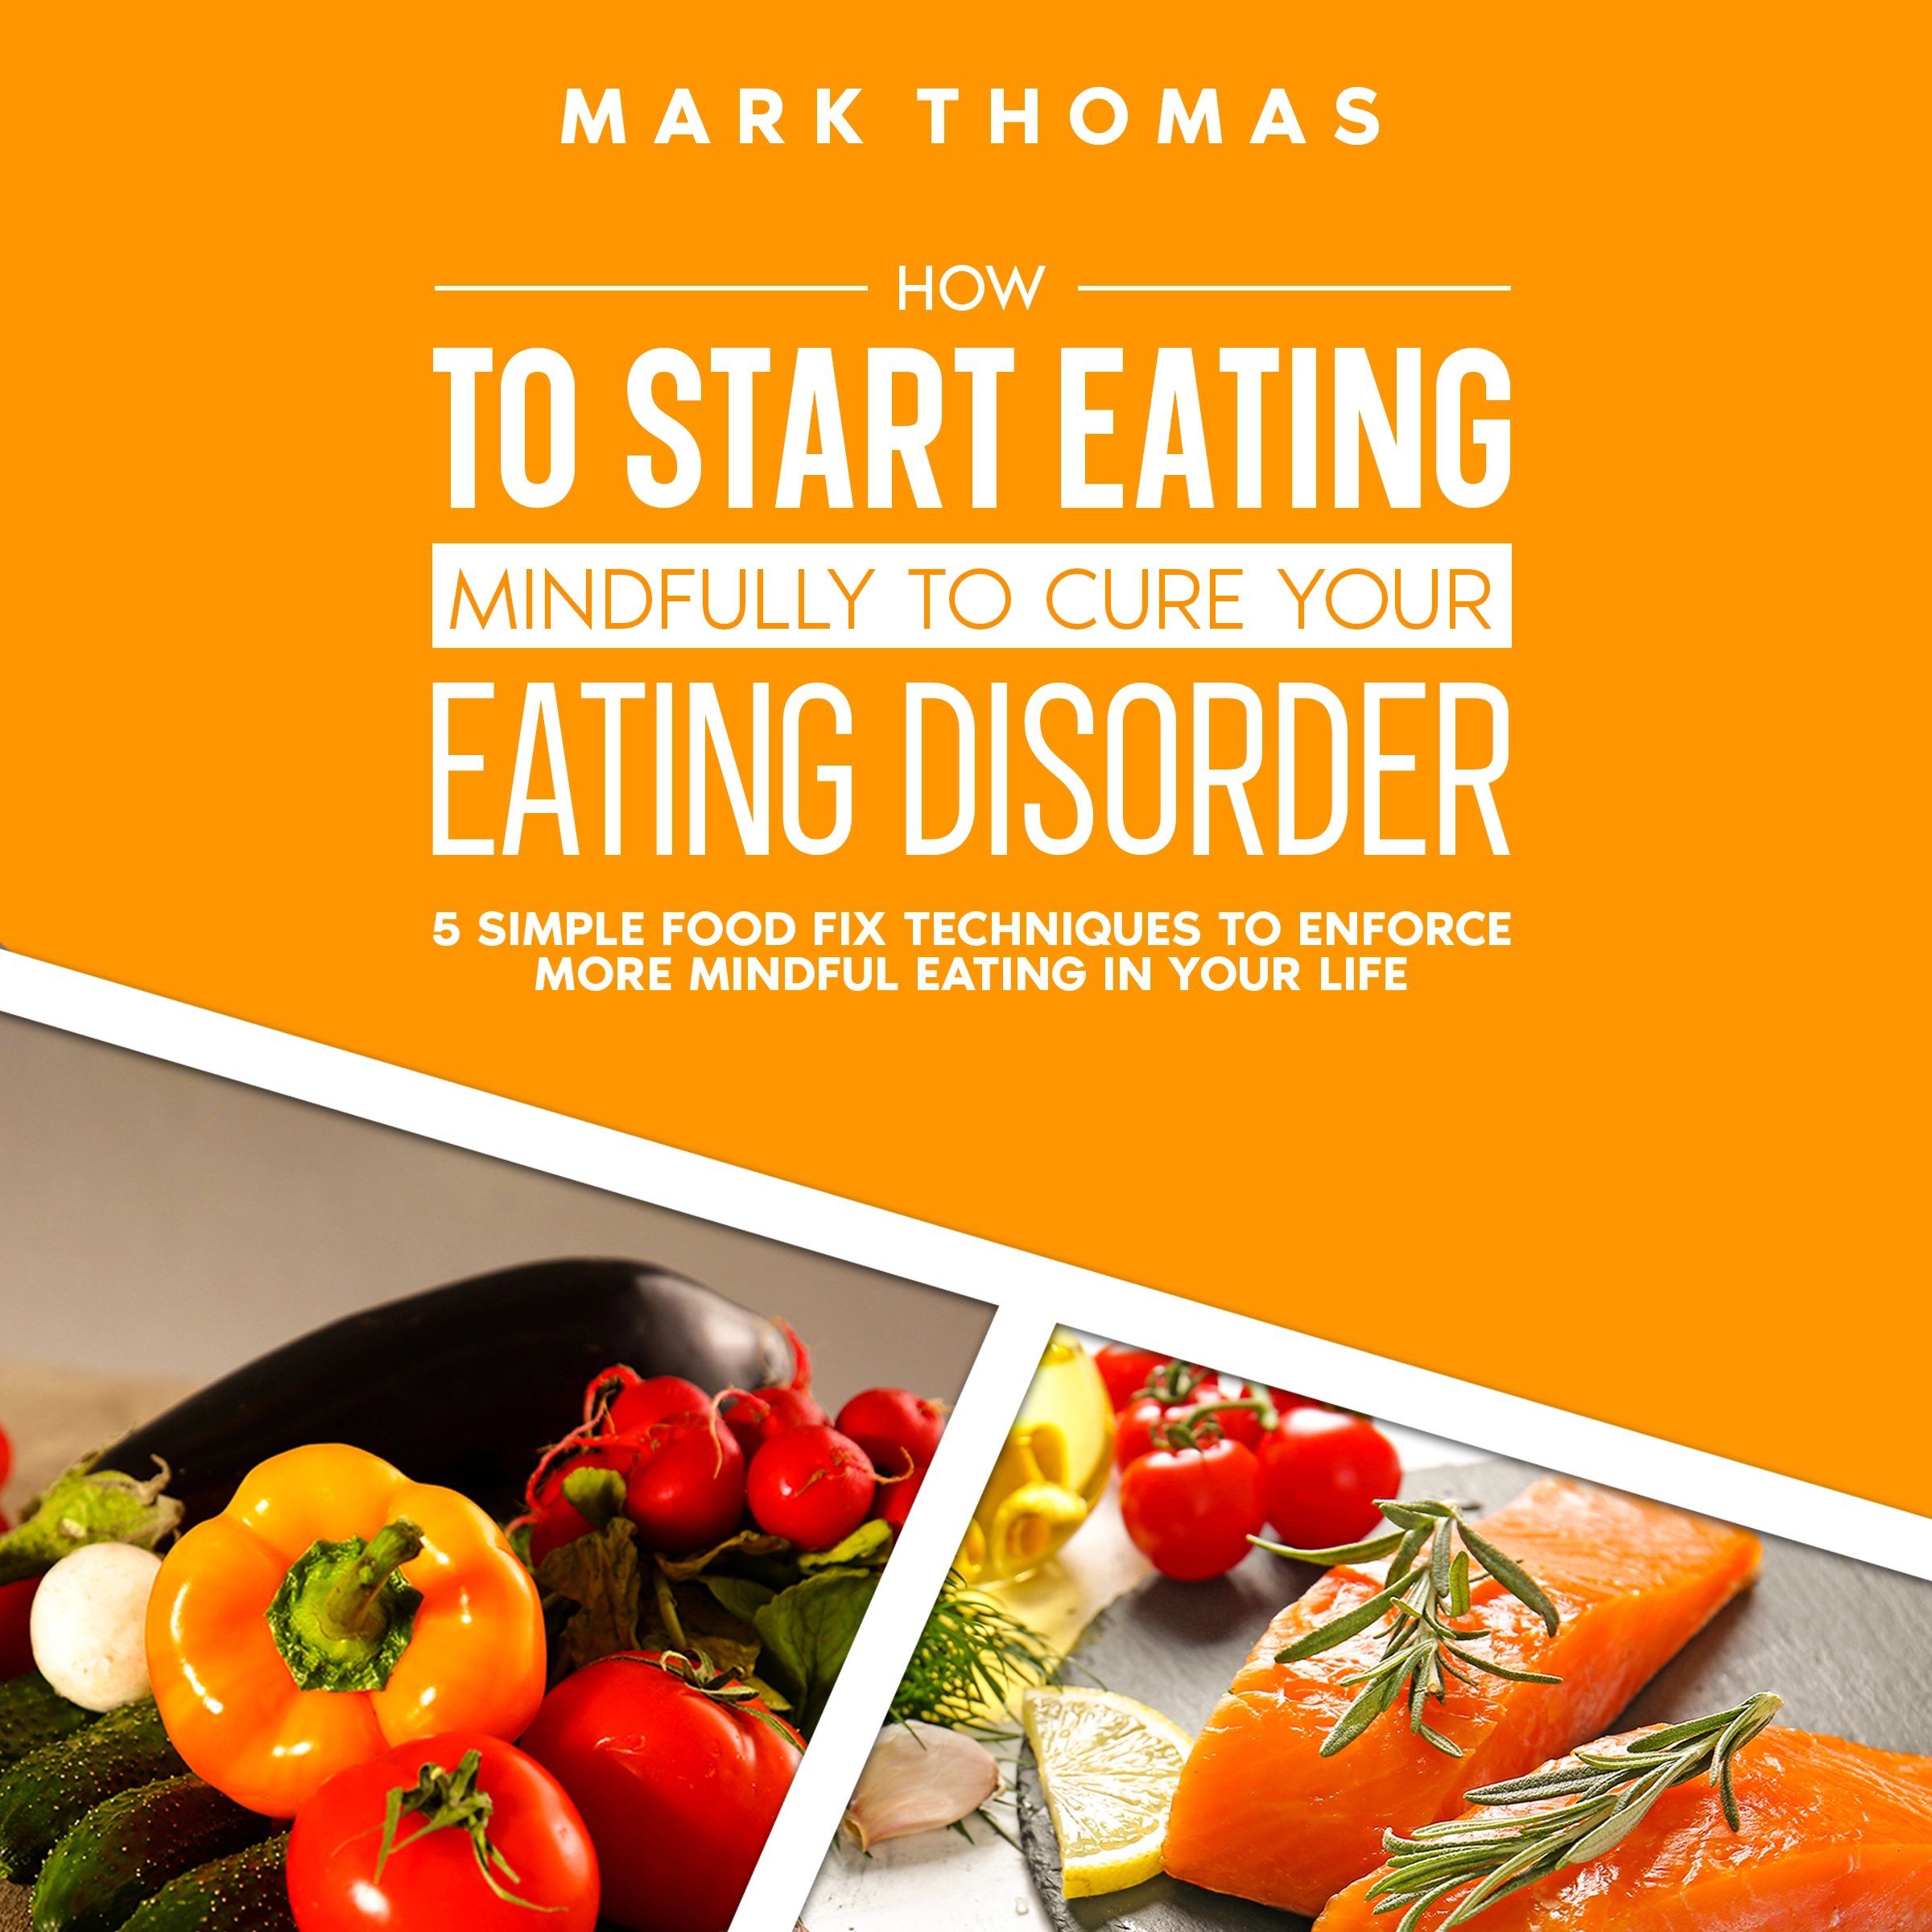 How To Start Eating Mindfully To Cure Your Eating Disorder by Mark Thomas Audiobook